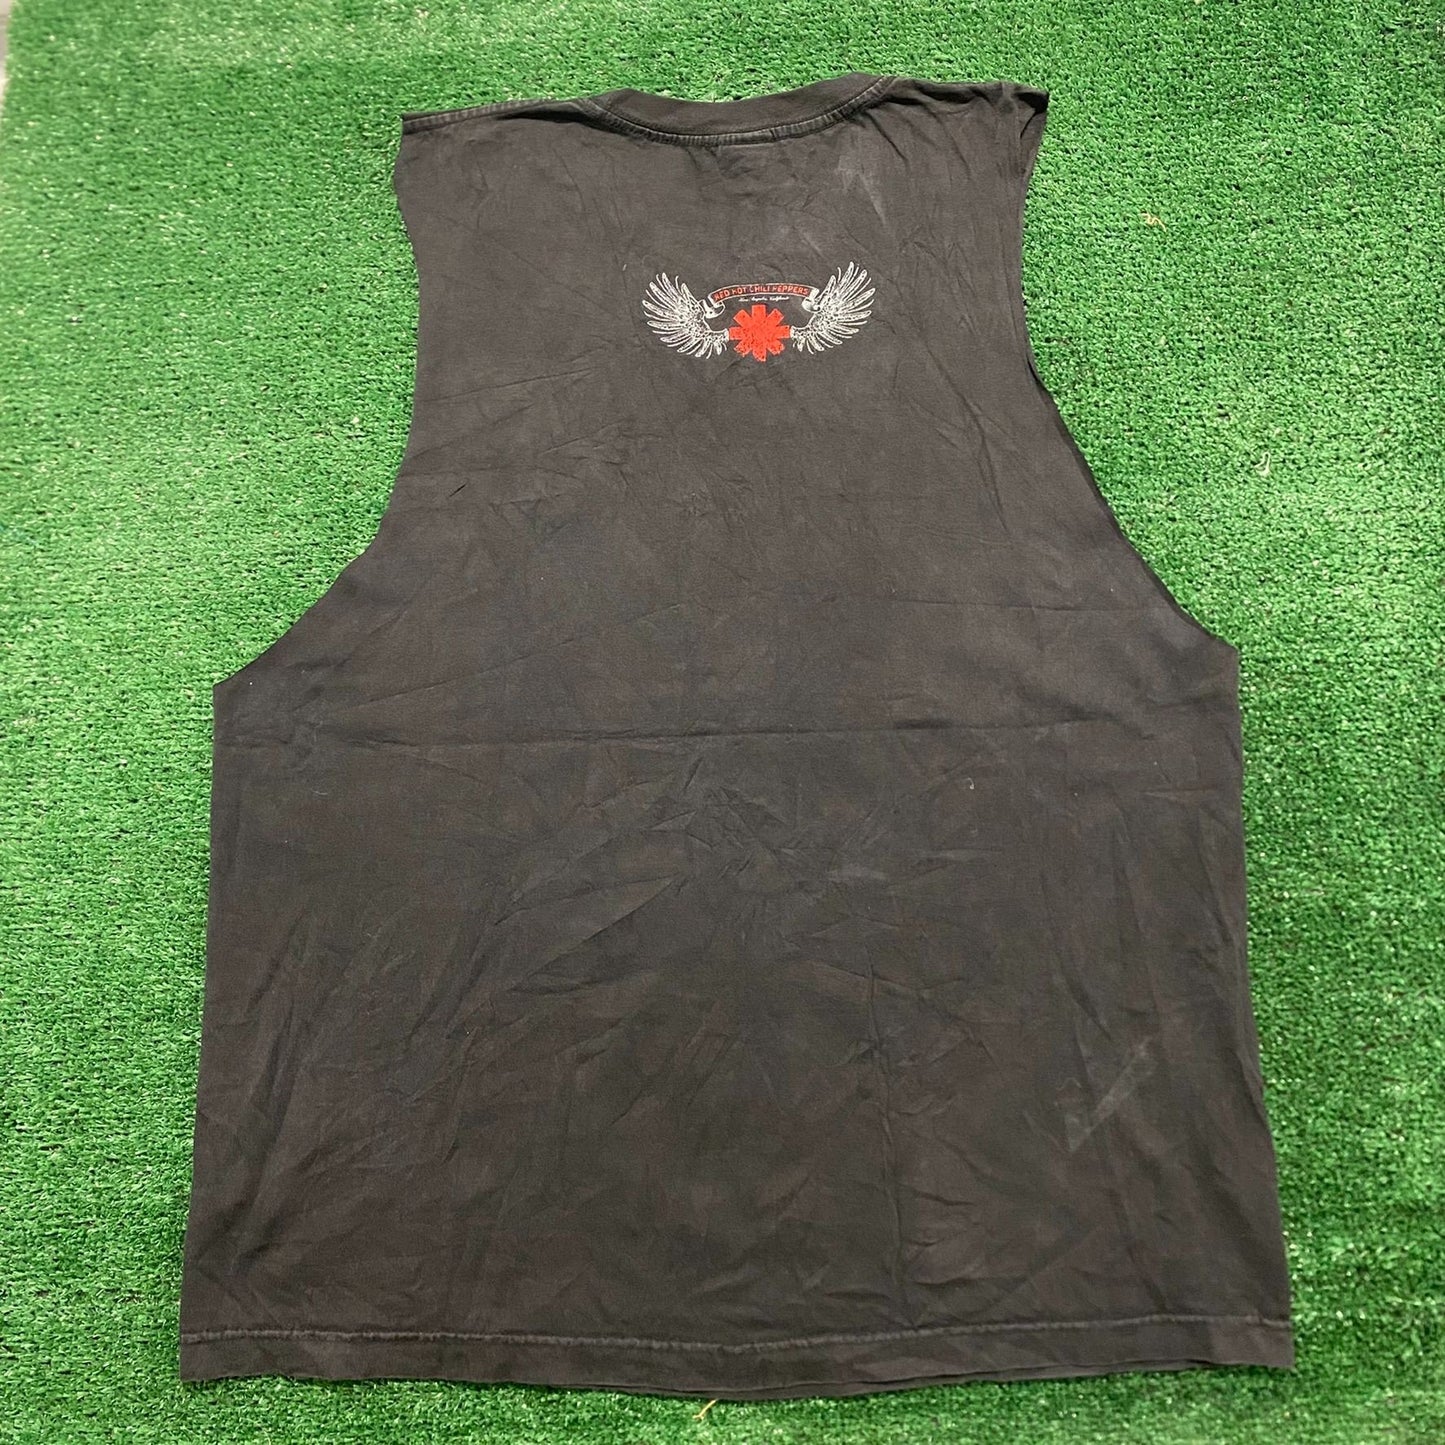 Vintage Baggy Red Hot Chili Peppers Punk Band Tee Tank Top